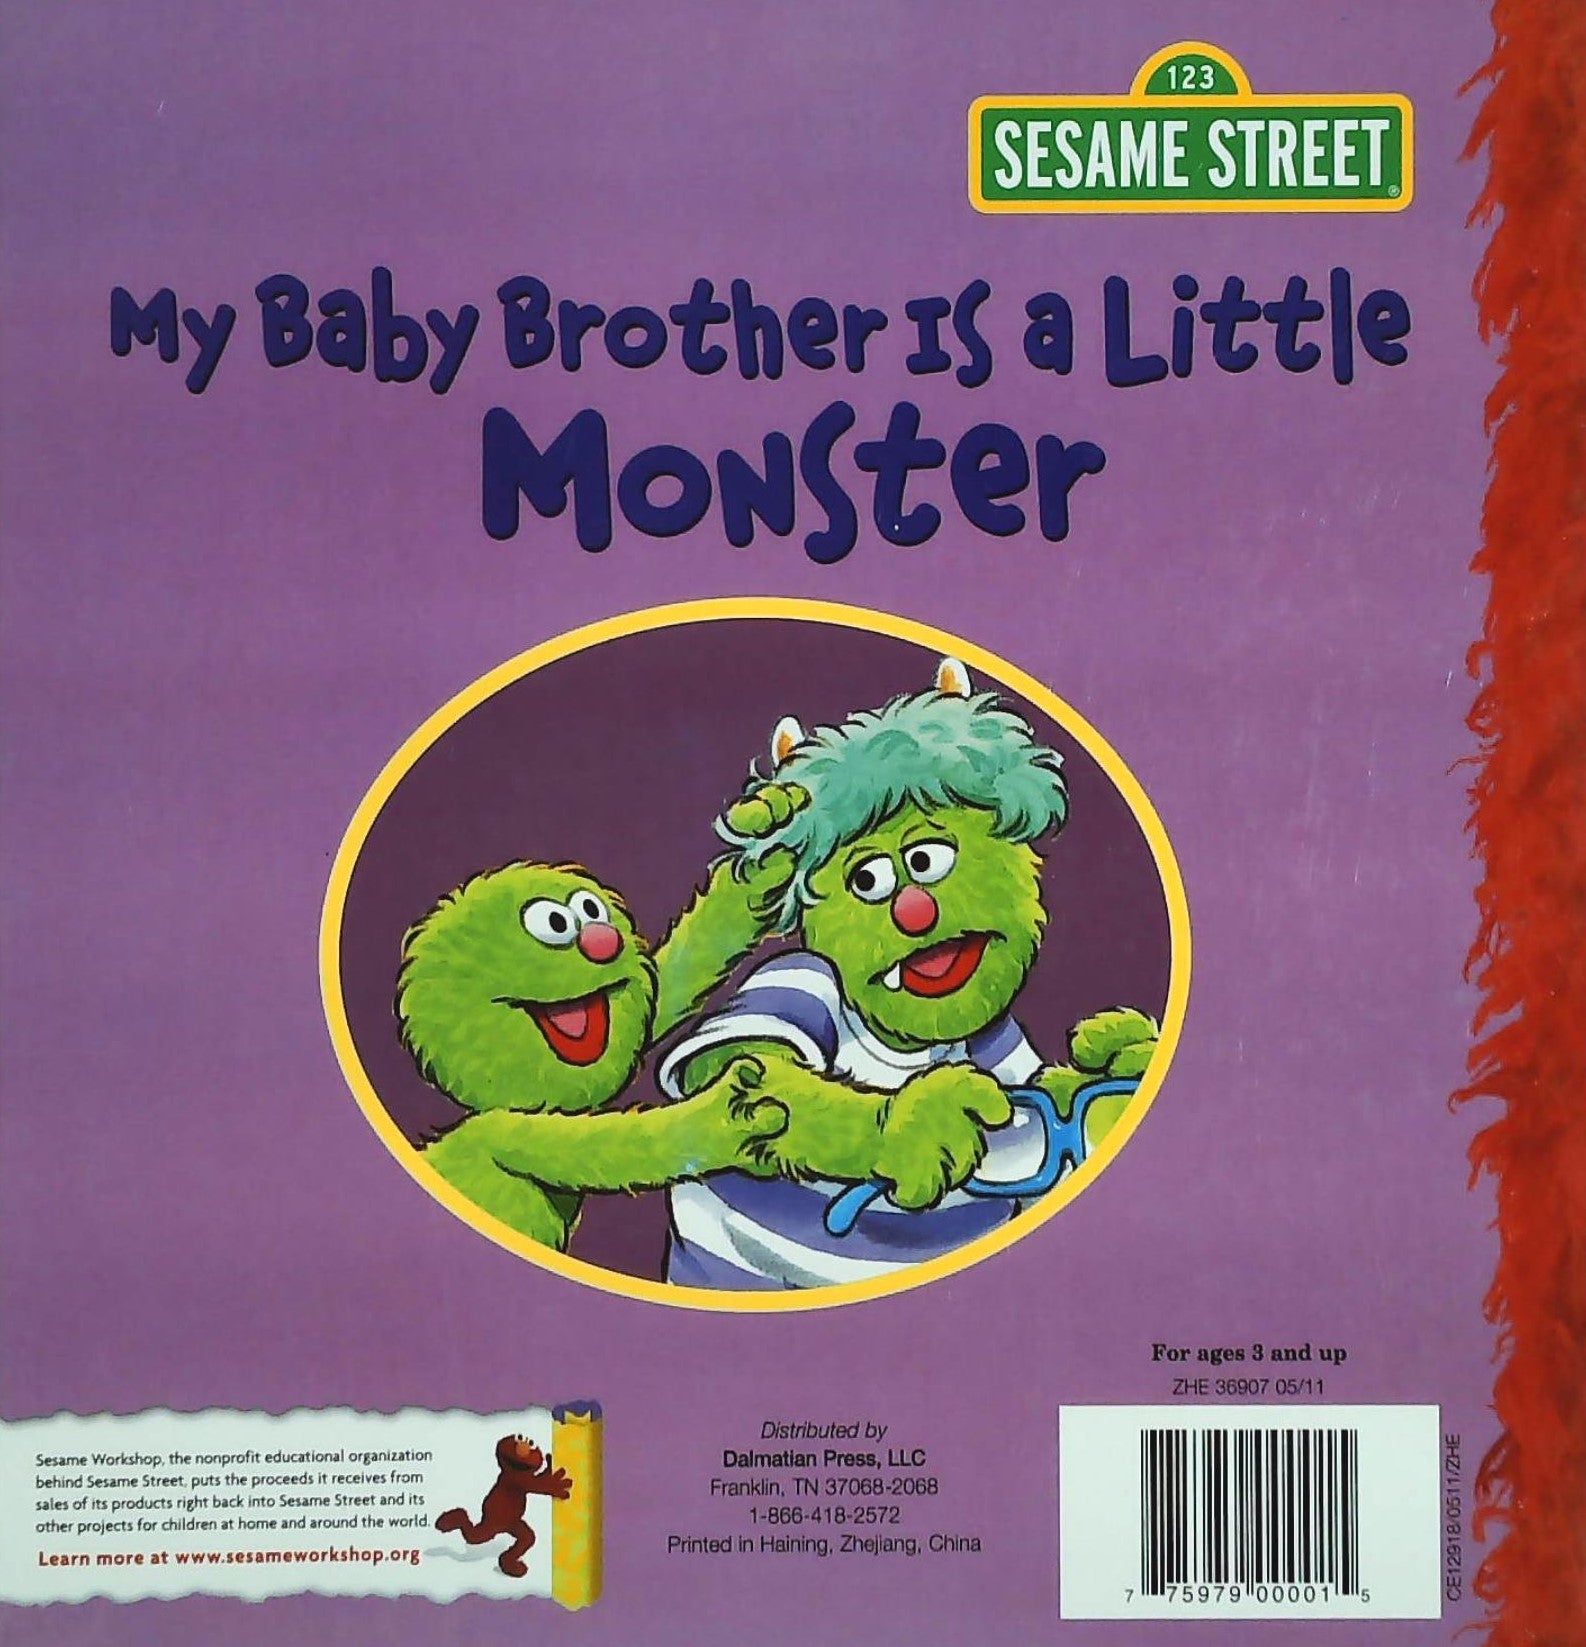 123 Sesame Street : My Baby Brother is a Little Monster